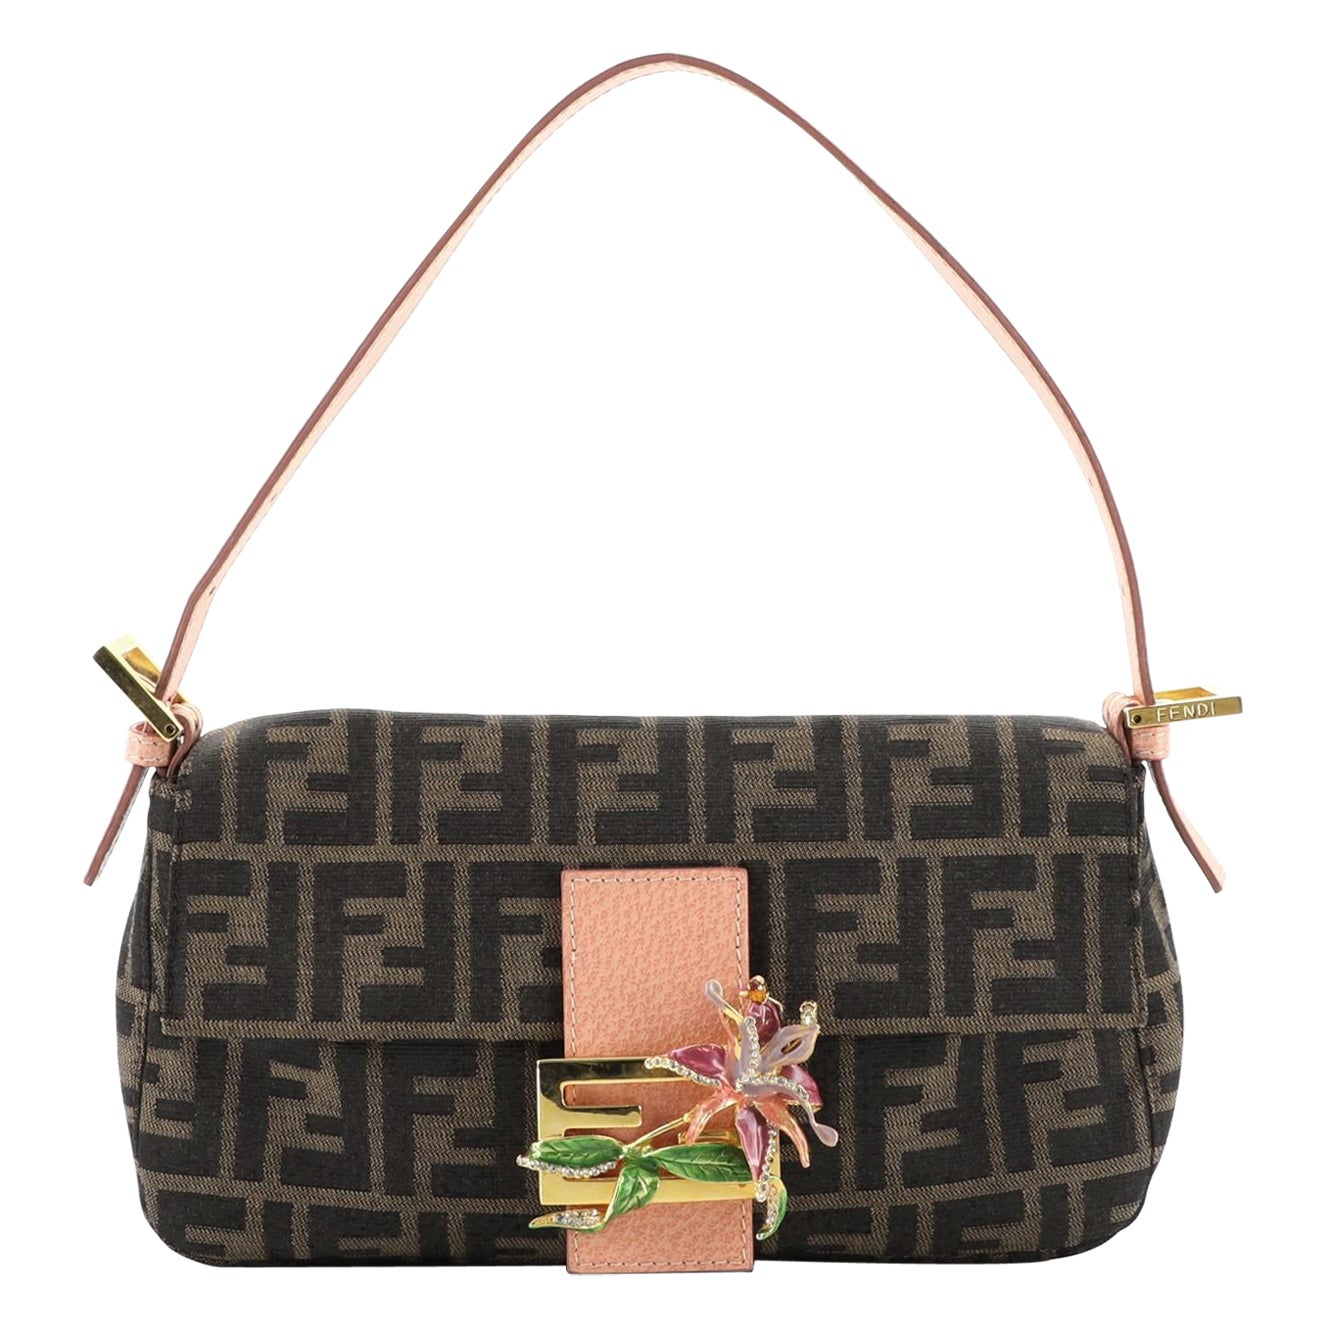 Fendi Baguette Bag Zucca Canvas with Crystal Flower Buckle